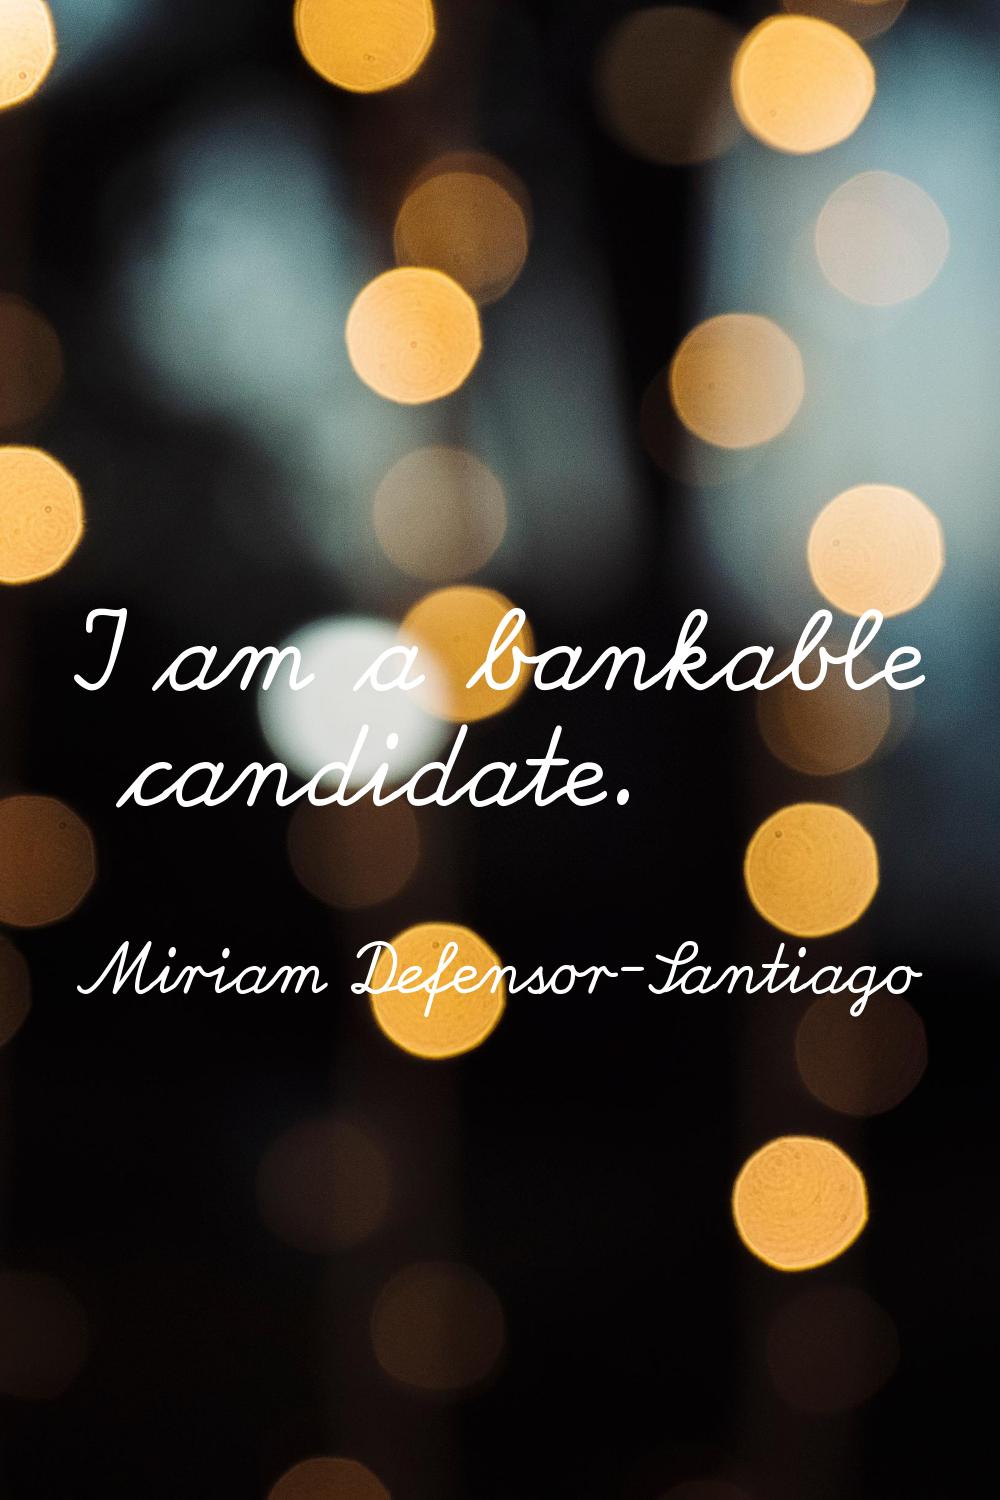 I am a bankable candidate.